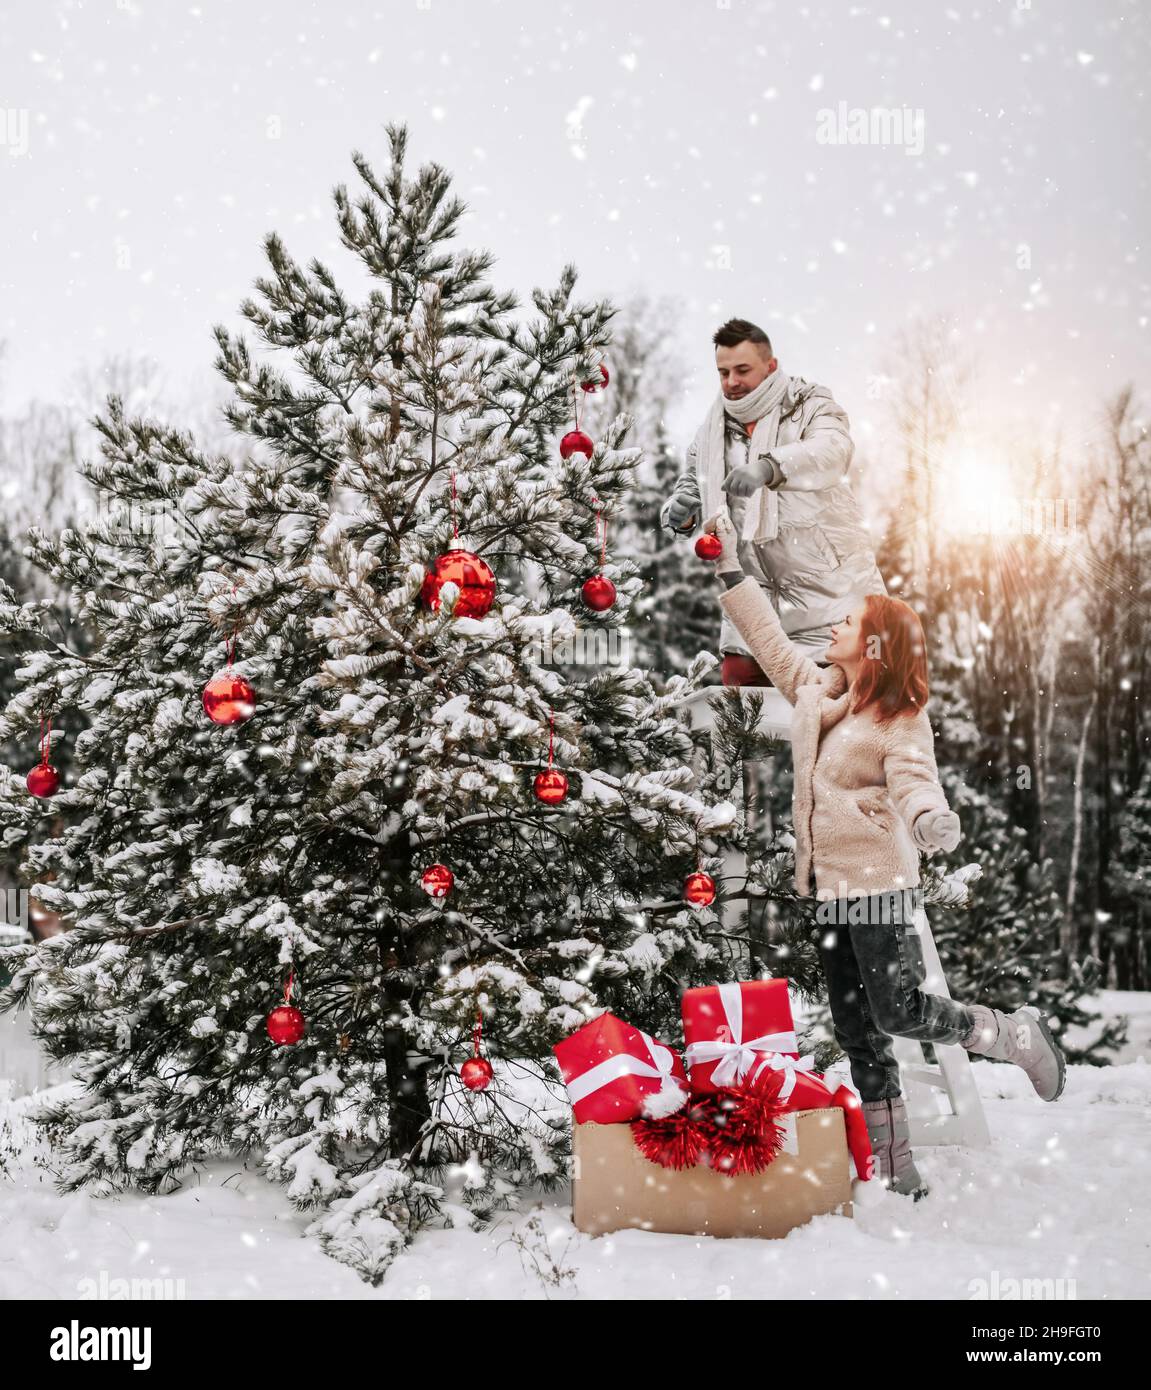 Young happy couple in stylish winter clothing decorating Christmas tree with red balls outdoors in winter snowy forest Stock Photo